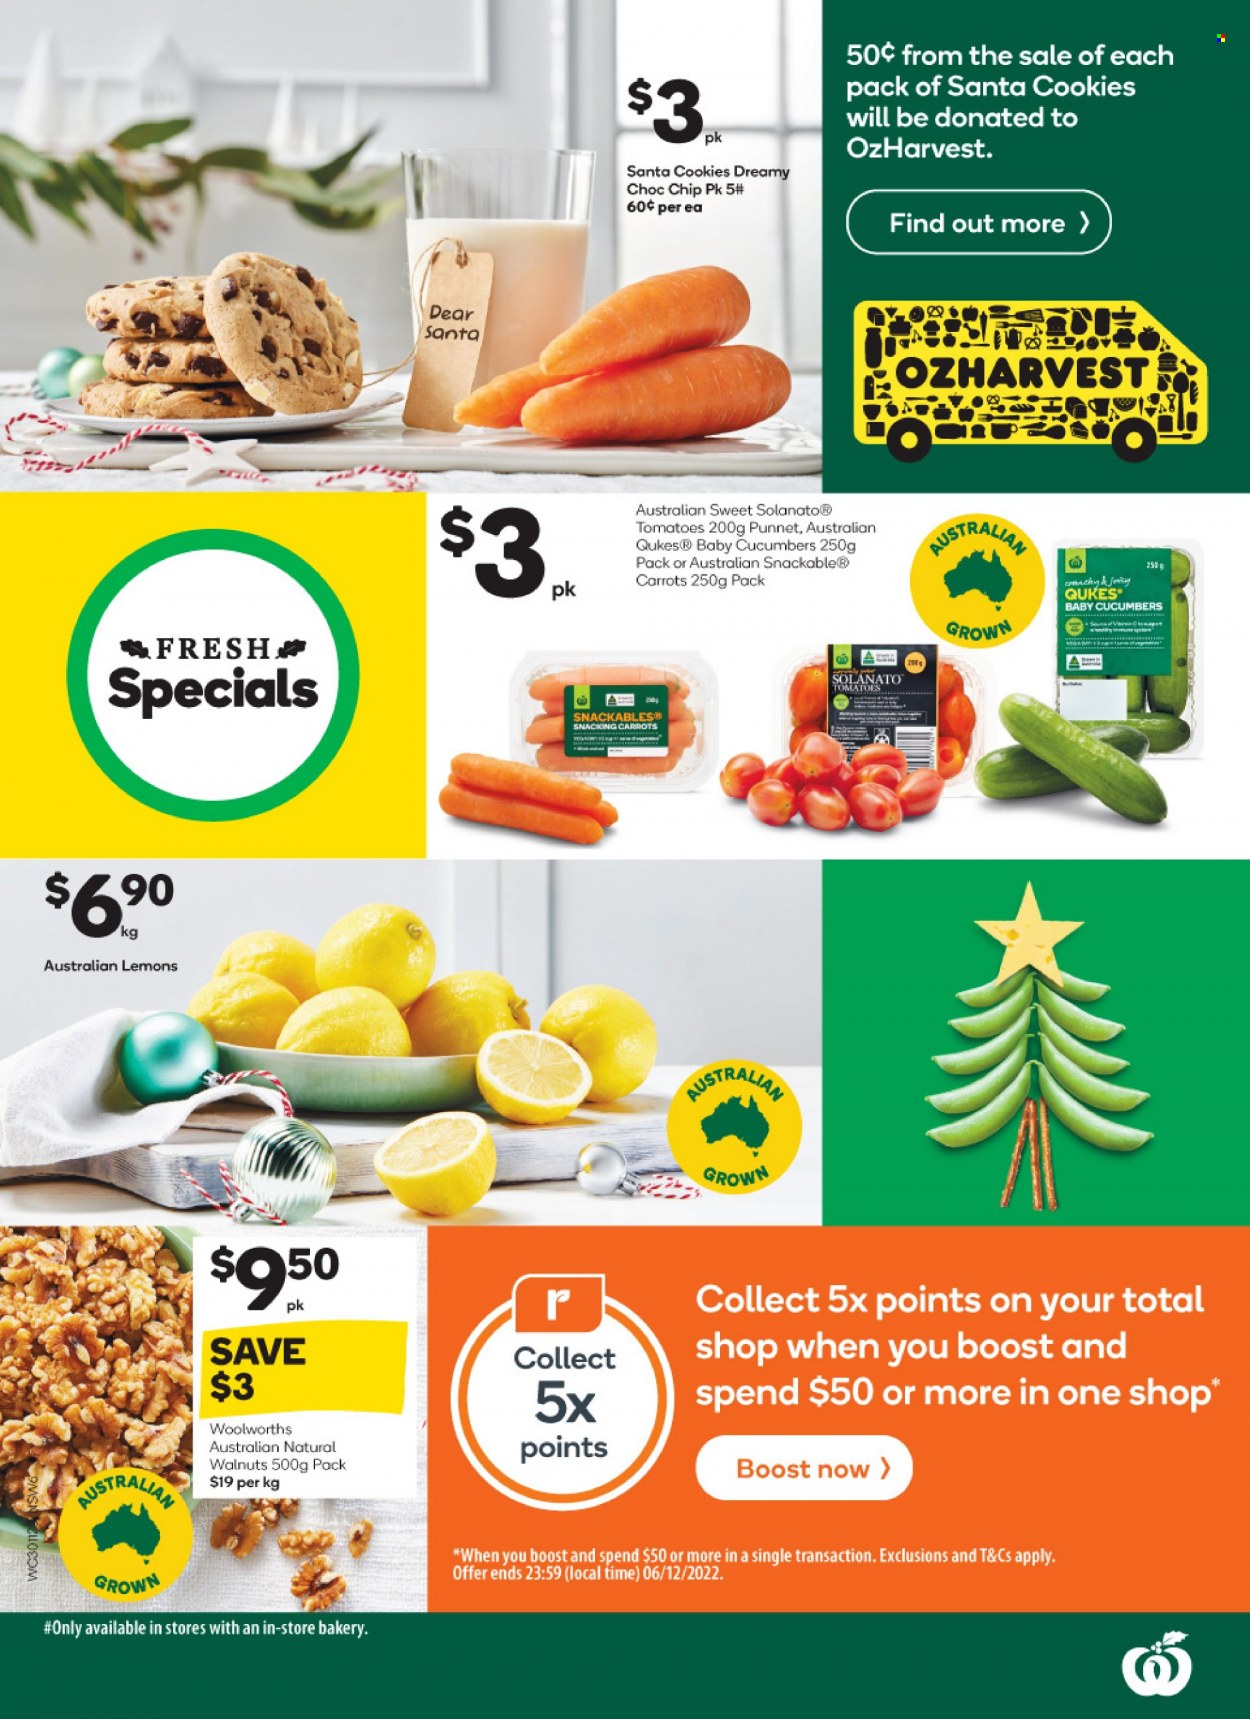 thumbnail - Woolworths Catalogue - 30 Nov 2022 - 6 Dec 2022 - Sales products - carrots, cucumber, tomatoes, lemons, cookies, Santa, walnuts, Boost. Page 6.